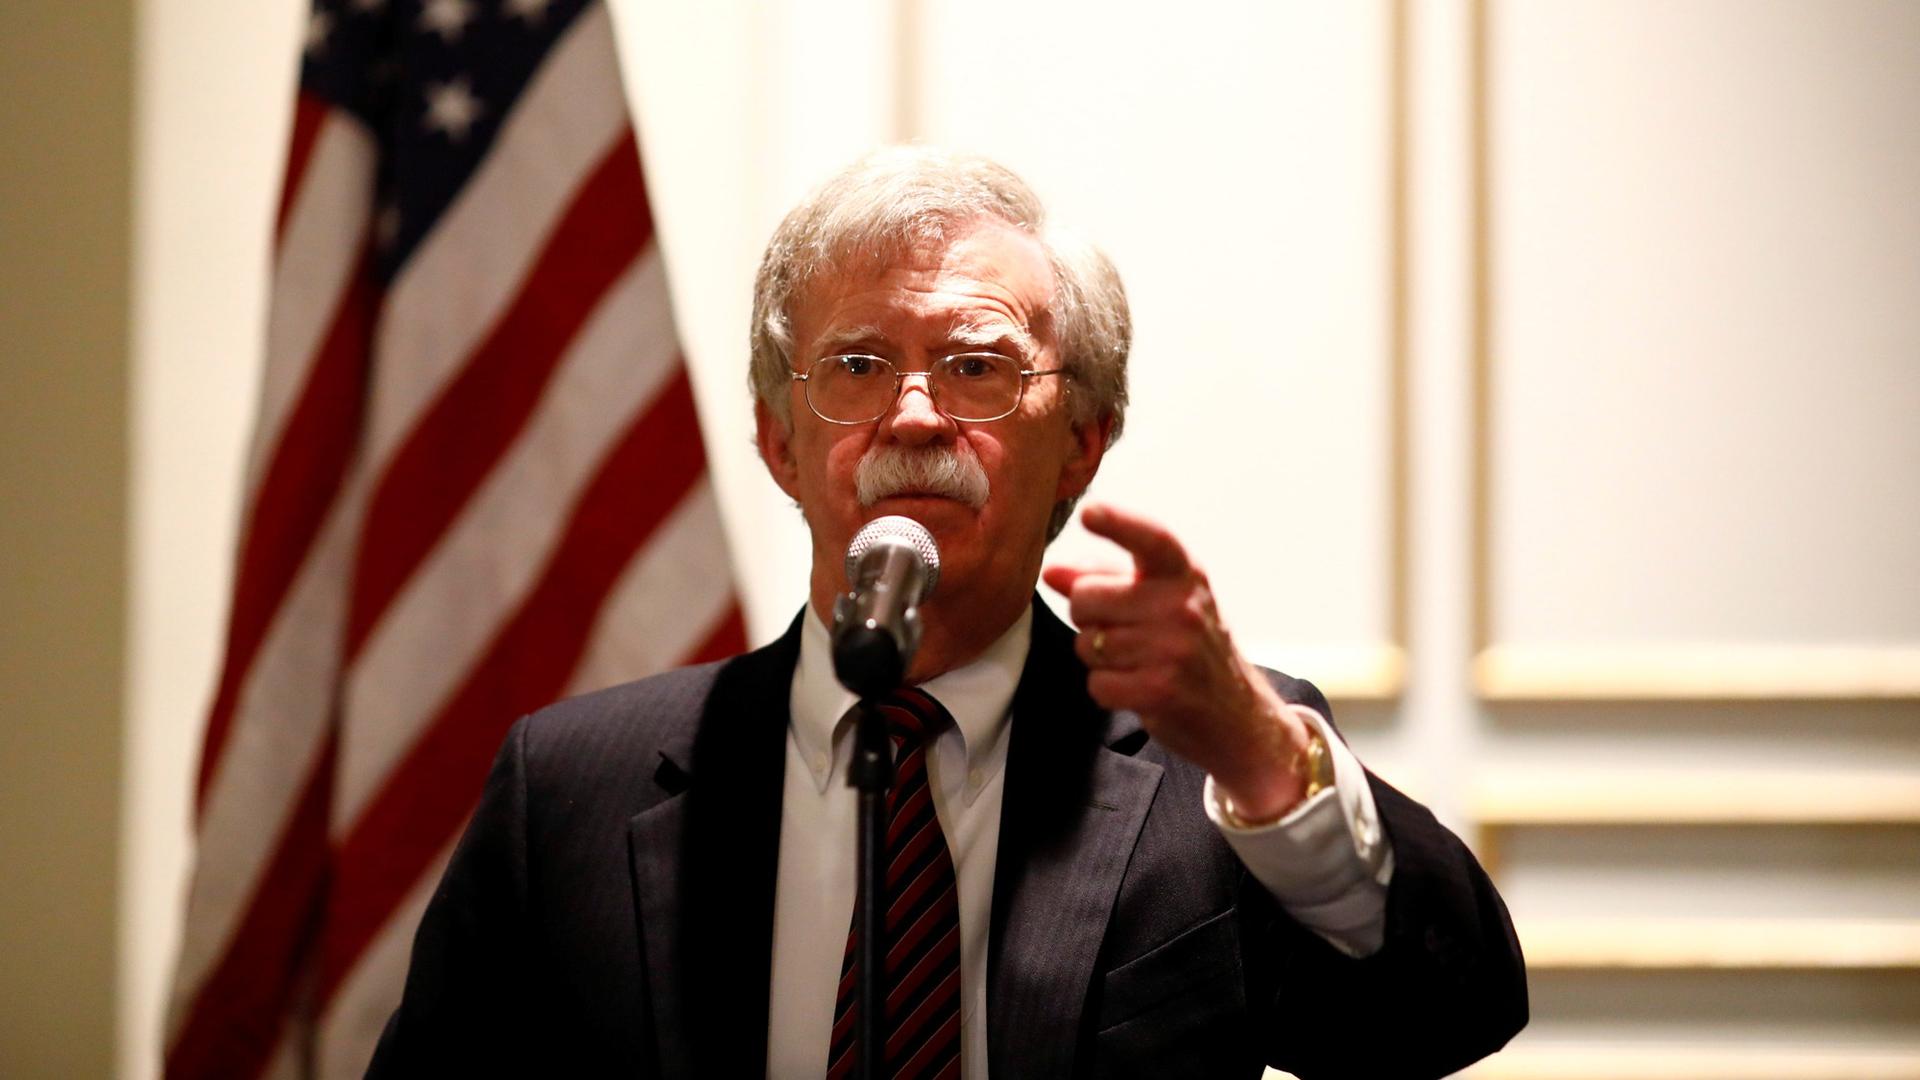 National Security Adviser John Bolton is shown at a microphone with the US flag behind him, speaking at a forum in Washington, DC, 2018.